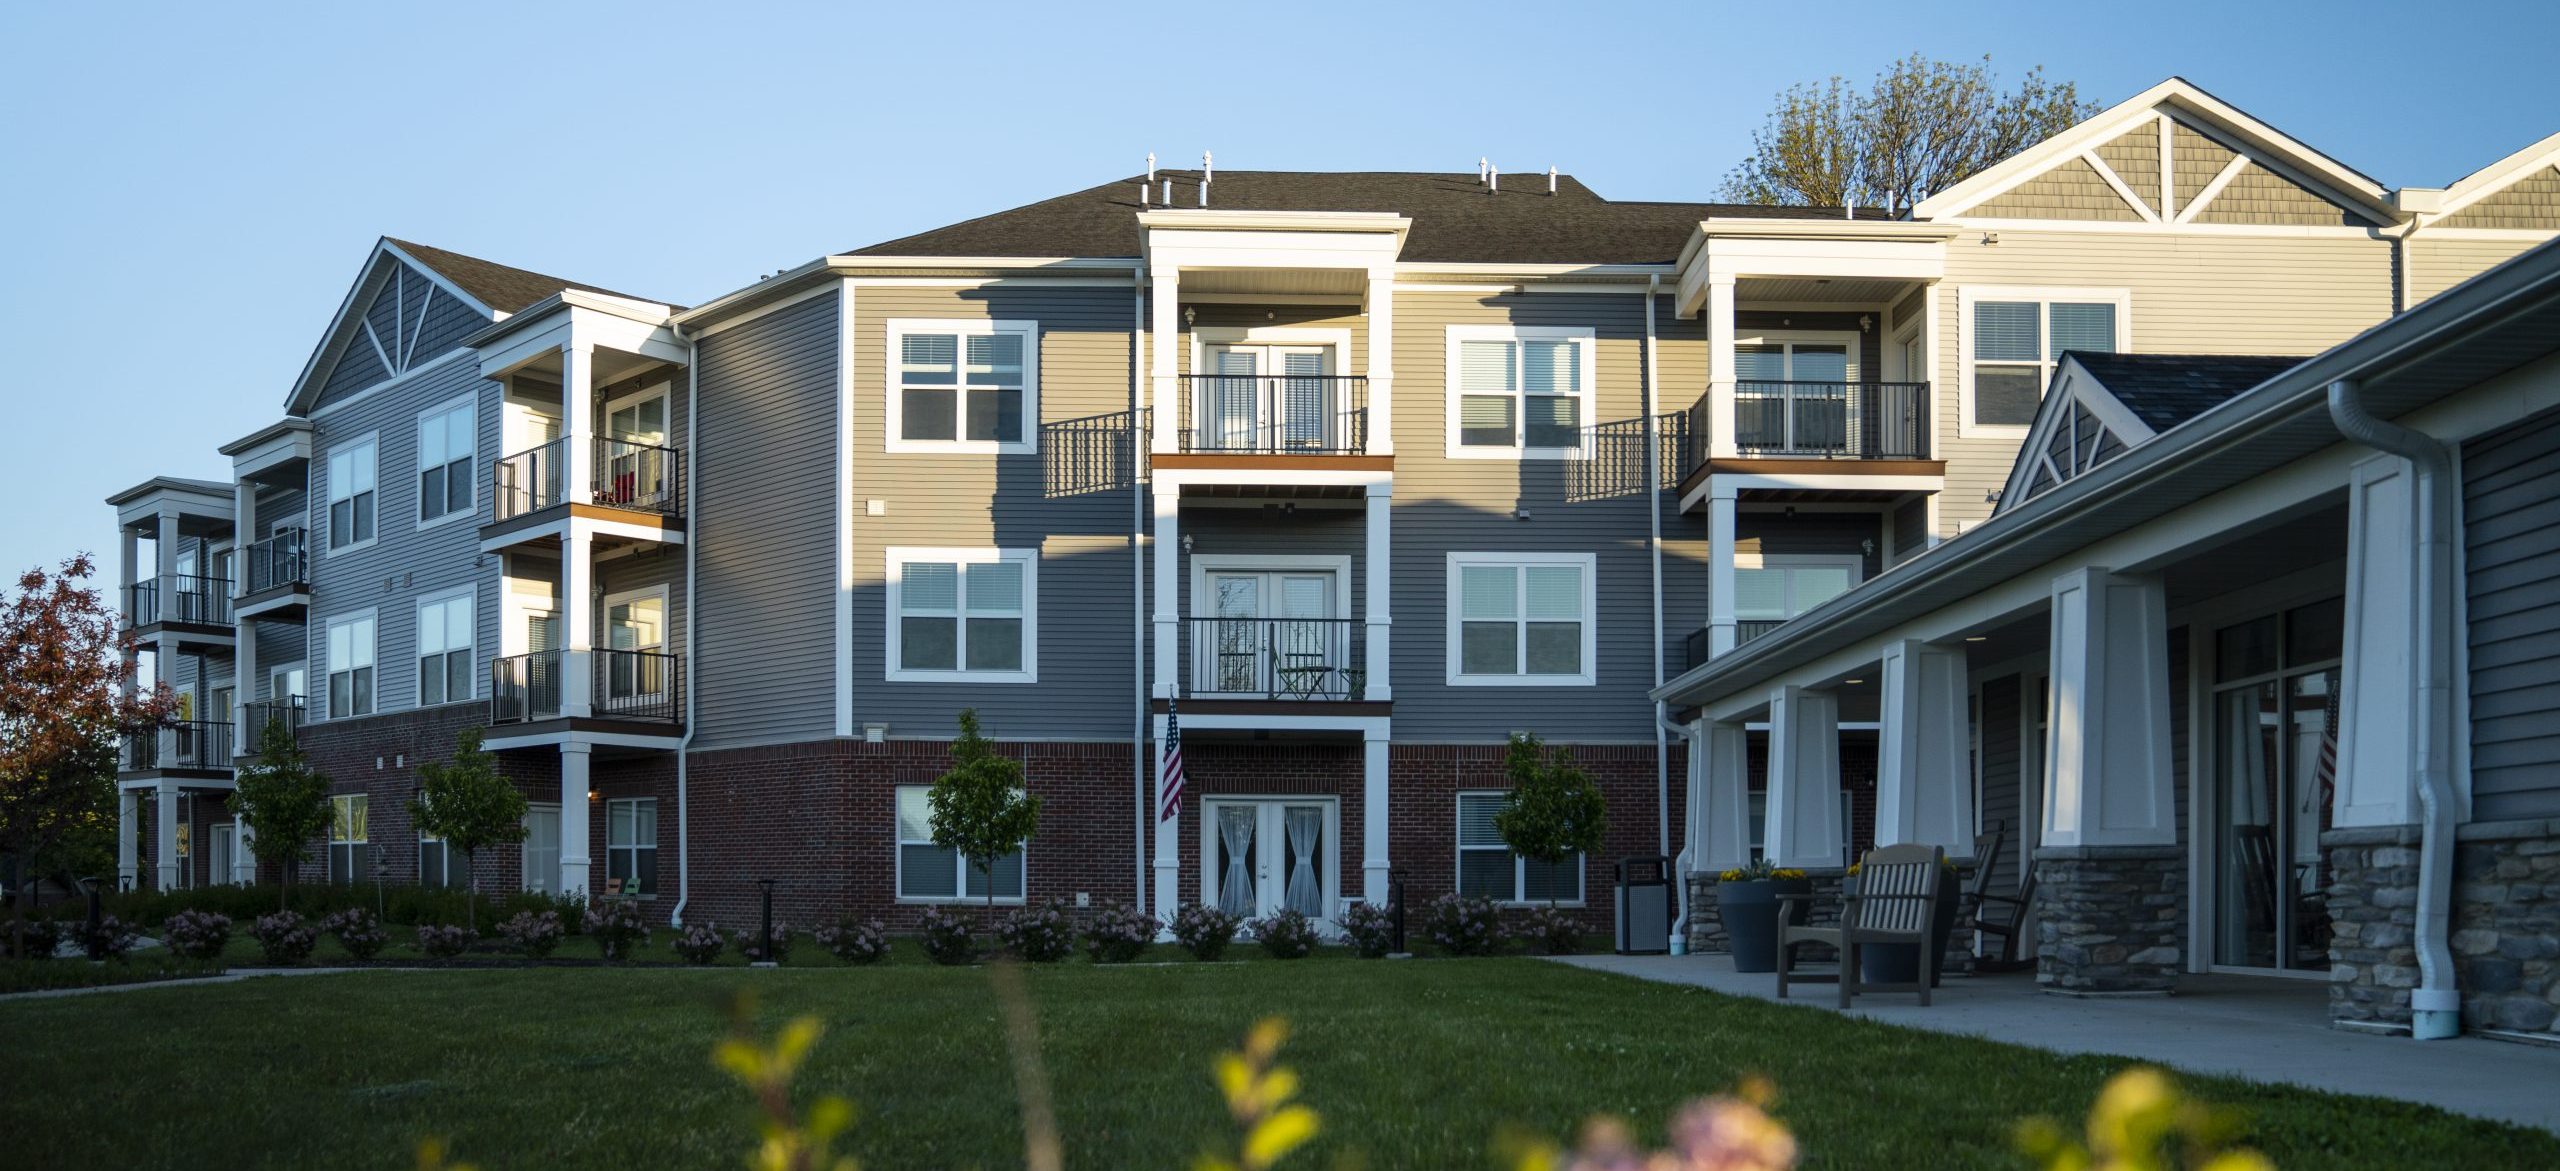 Exterior photo of Legacy Village apartments as the sun rises